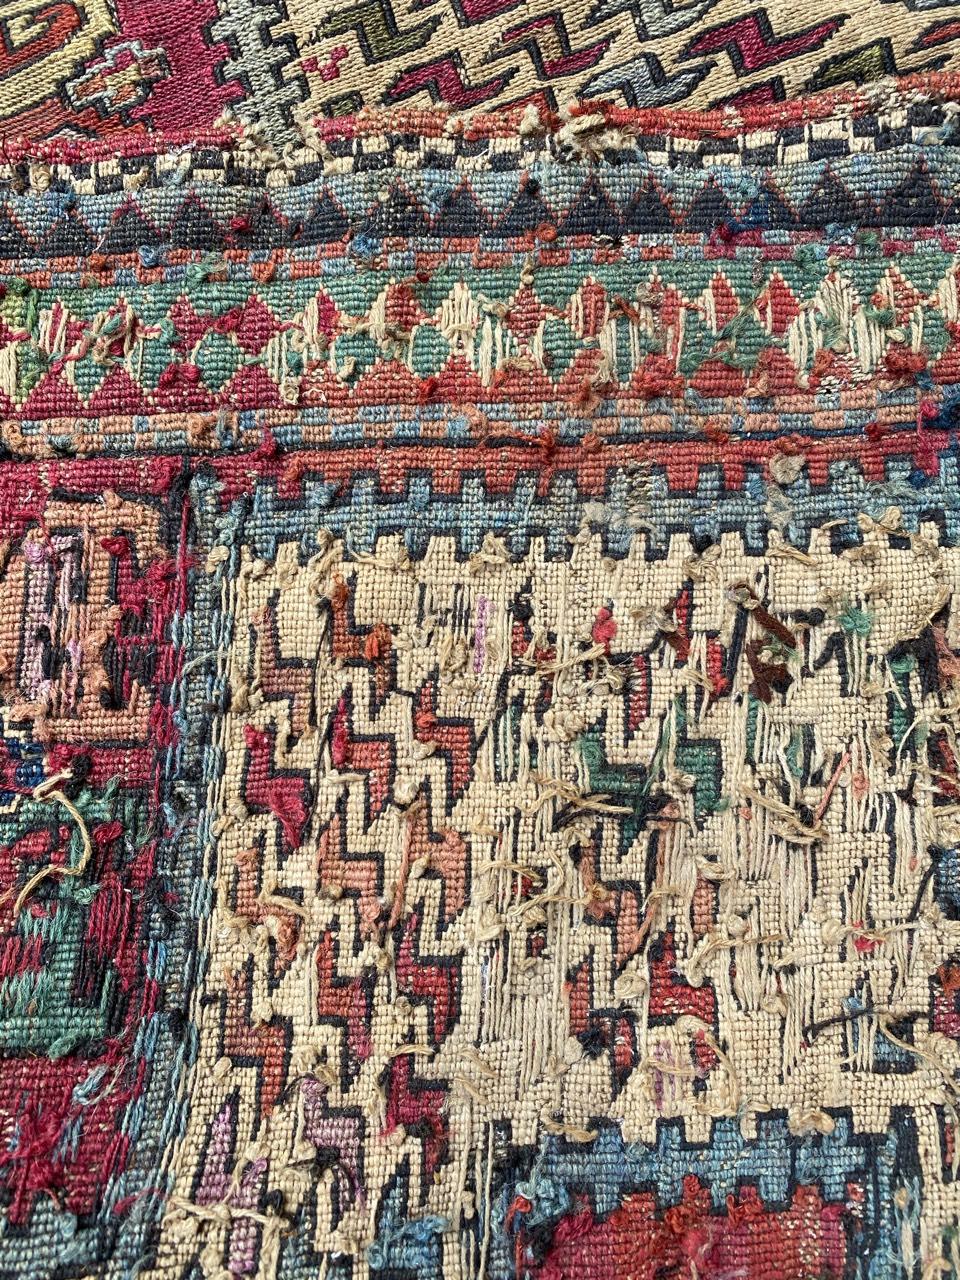 Very beautiful late 19th century or early 20th century Caucasian verneh Kilim with a tribal and geometrical design and beautiful colors, with blue, purple, green, pink and yellow, entirely hand embroidered with wool on wool.